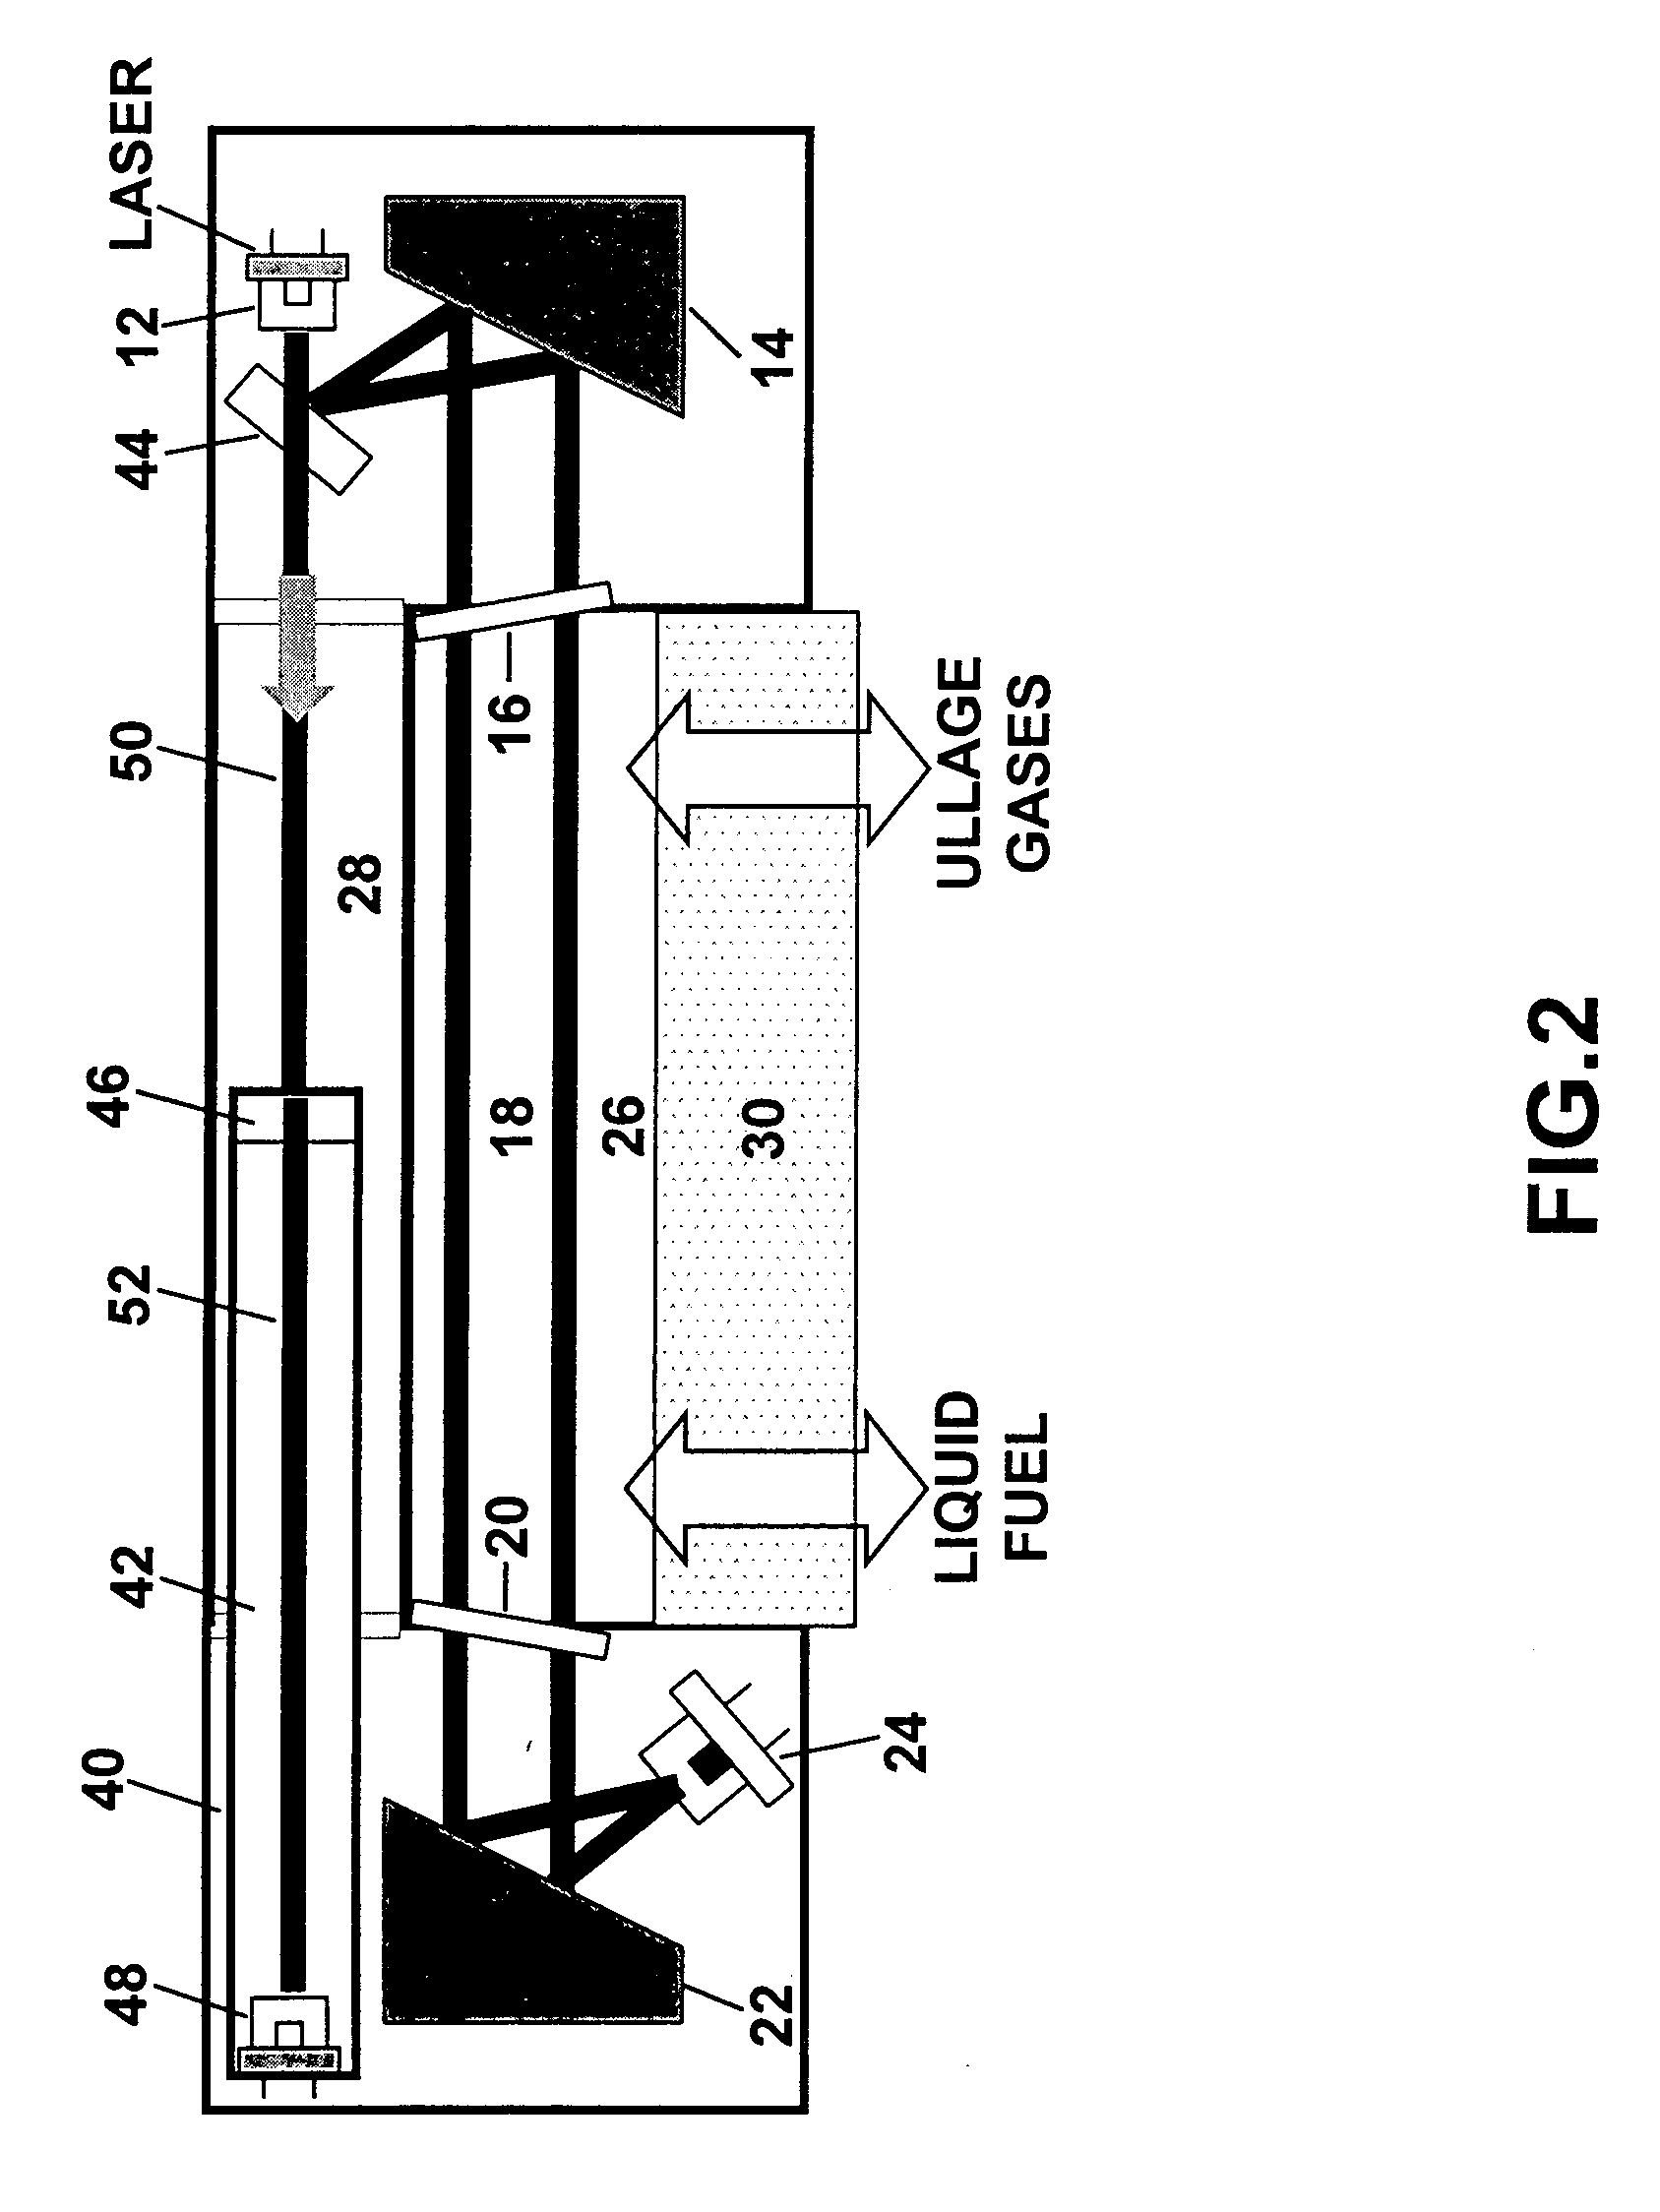 Oxygen sensor for aircraft fuel inerting systems